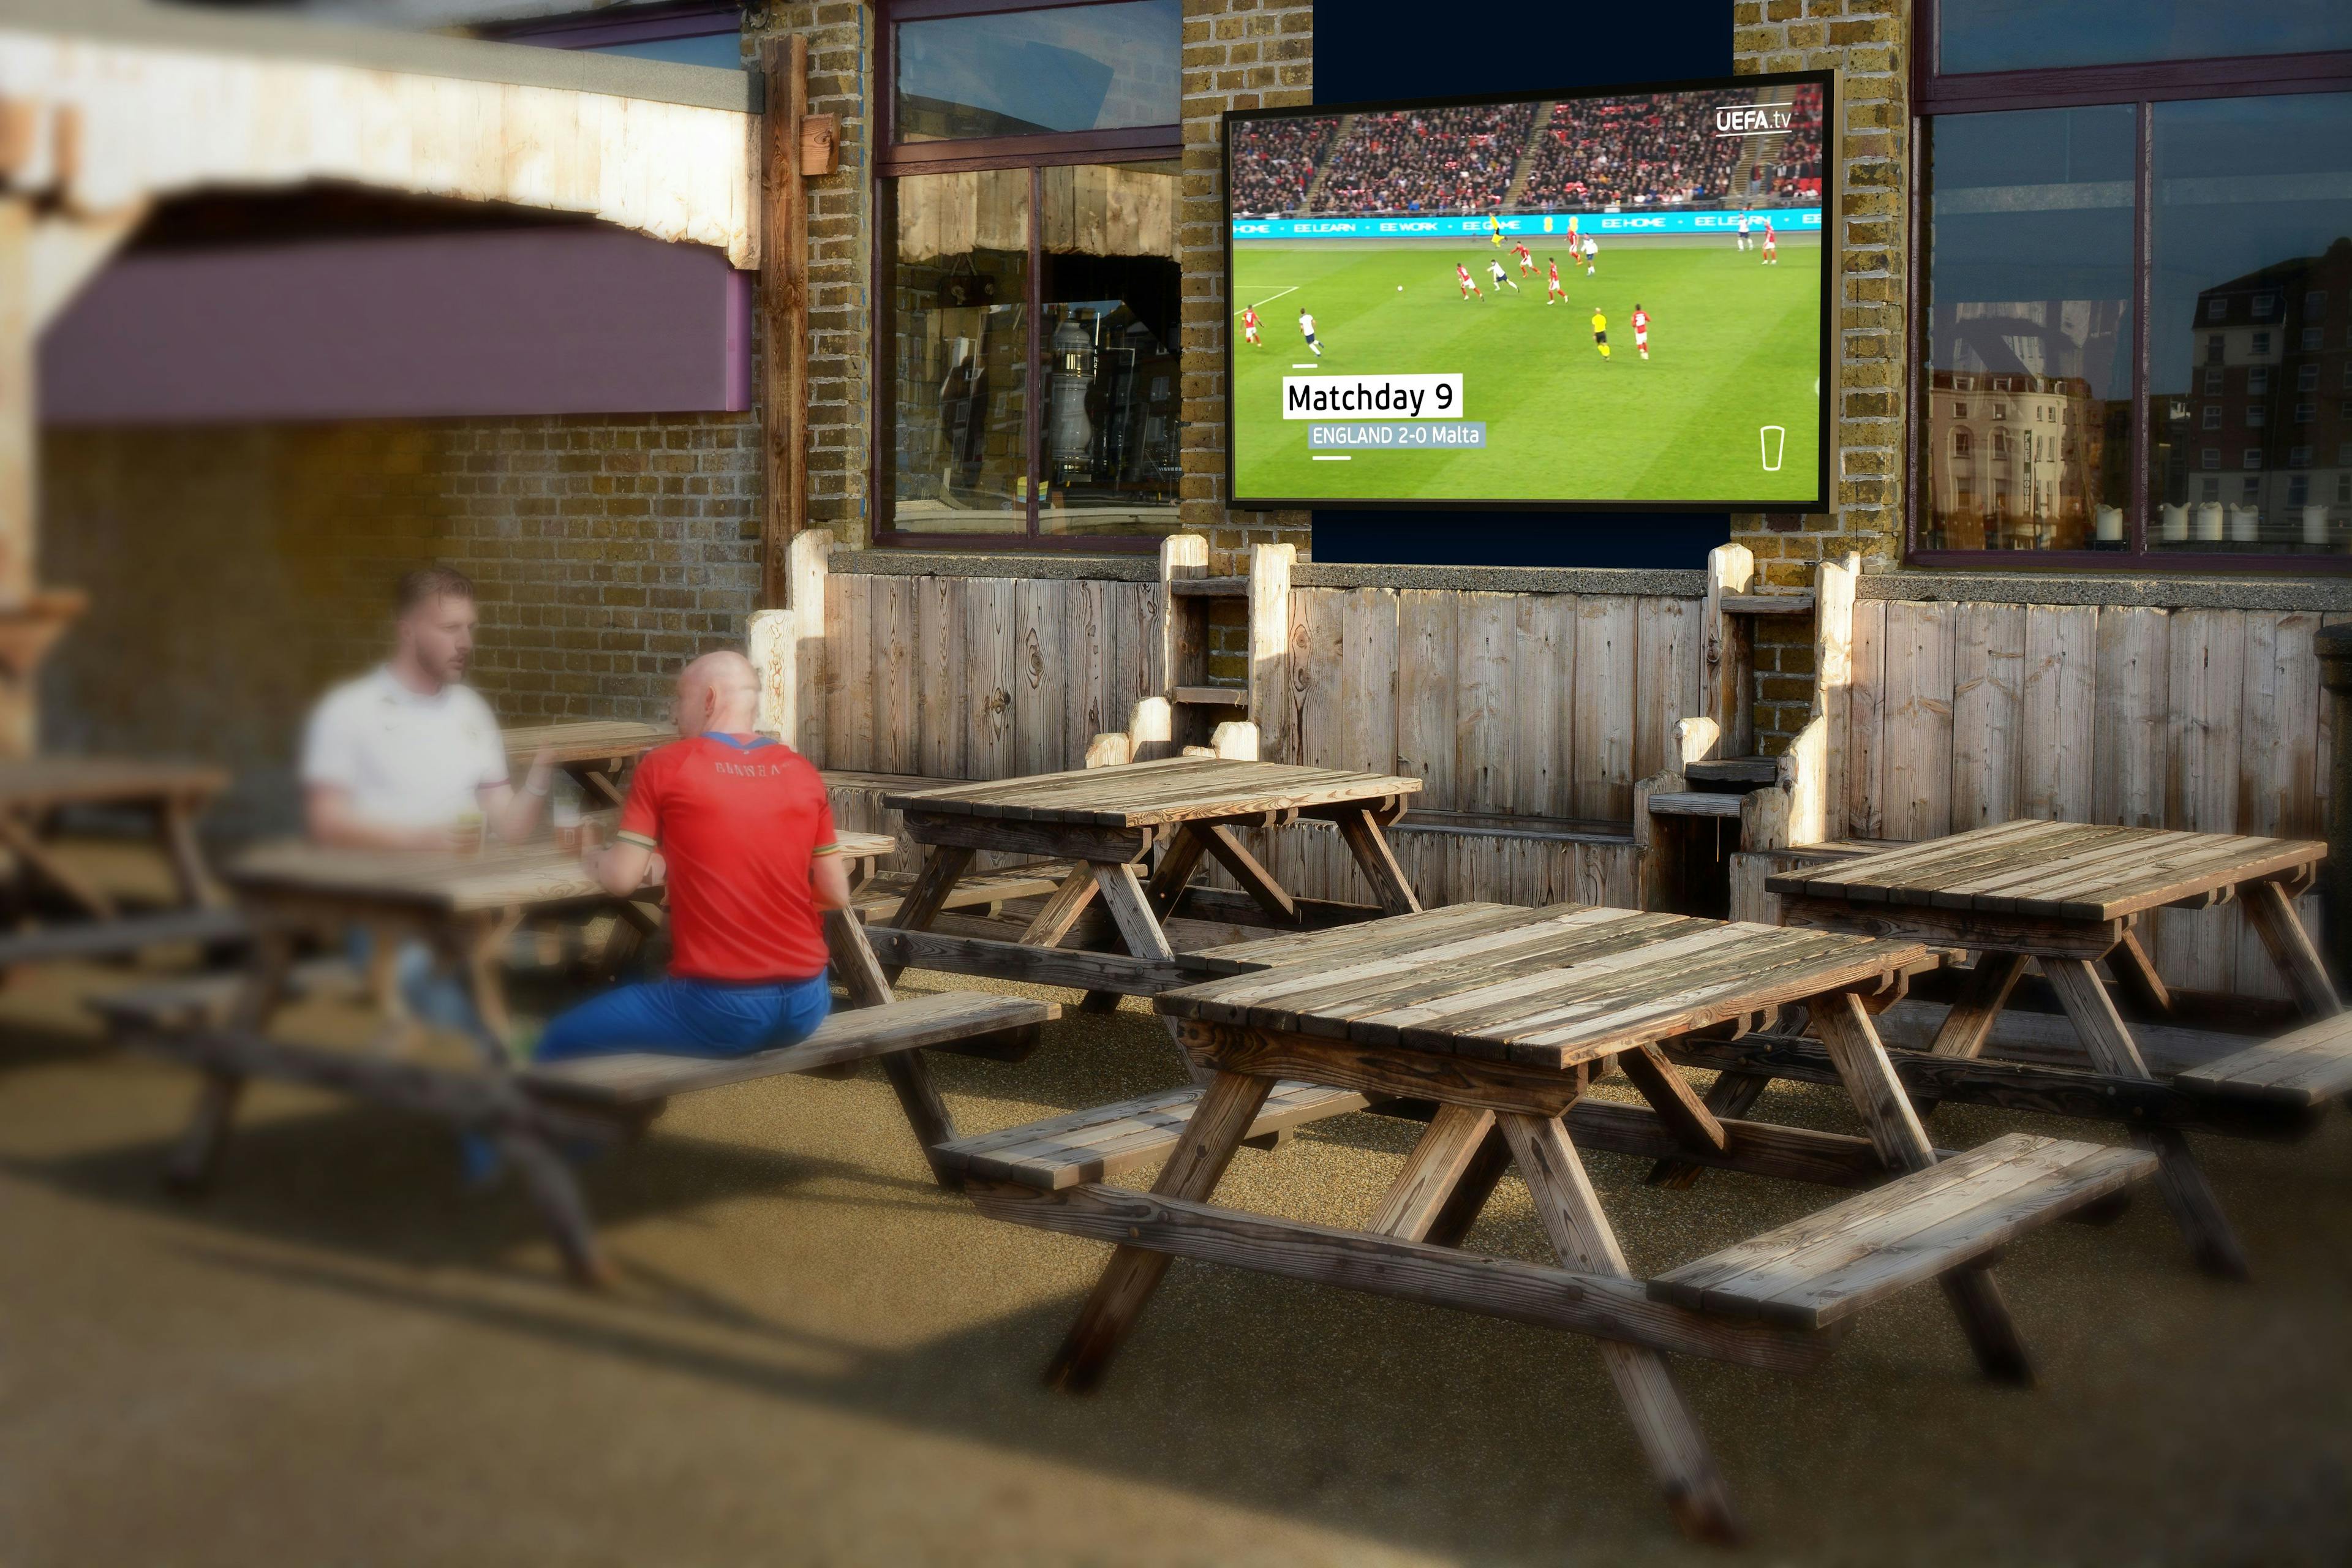 Enhance Your Venue's UEFA Champions League Experience with Outdoor Smart Digital Display